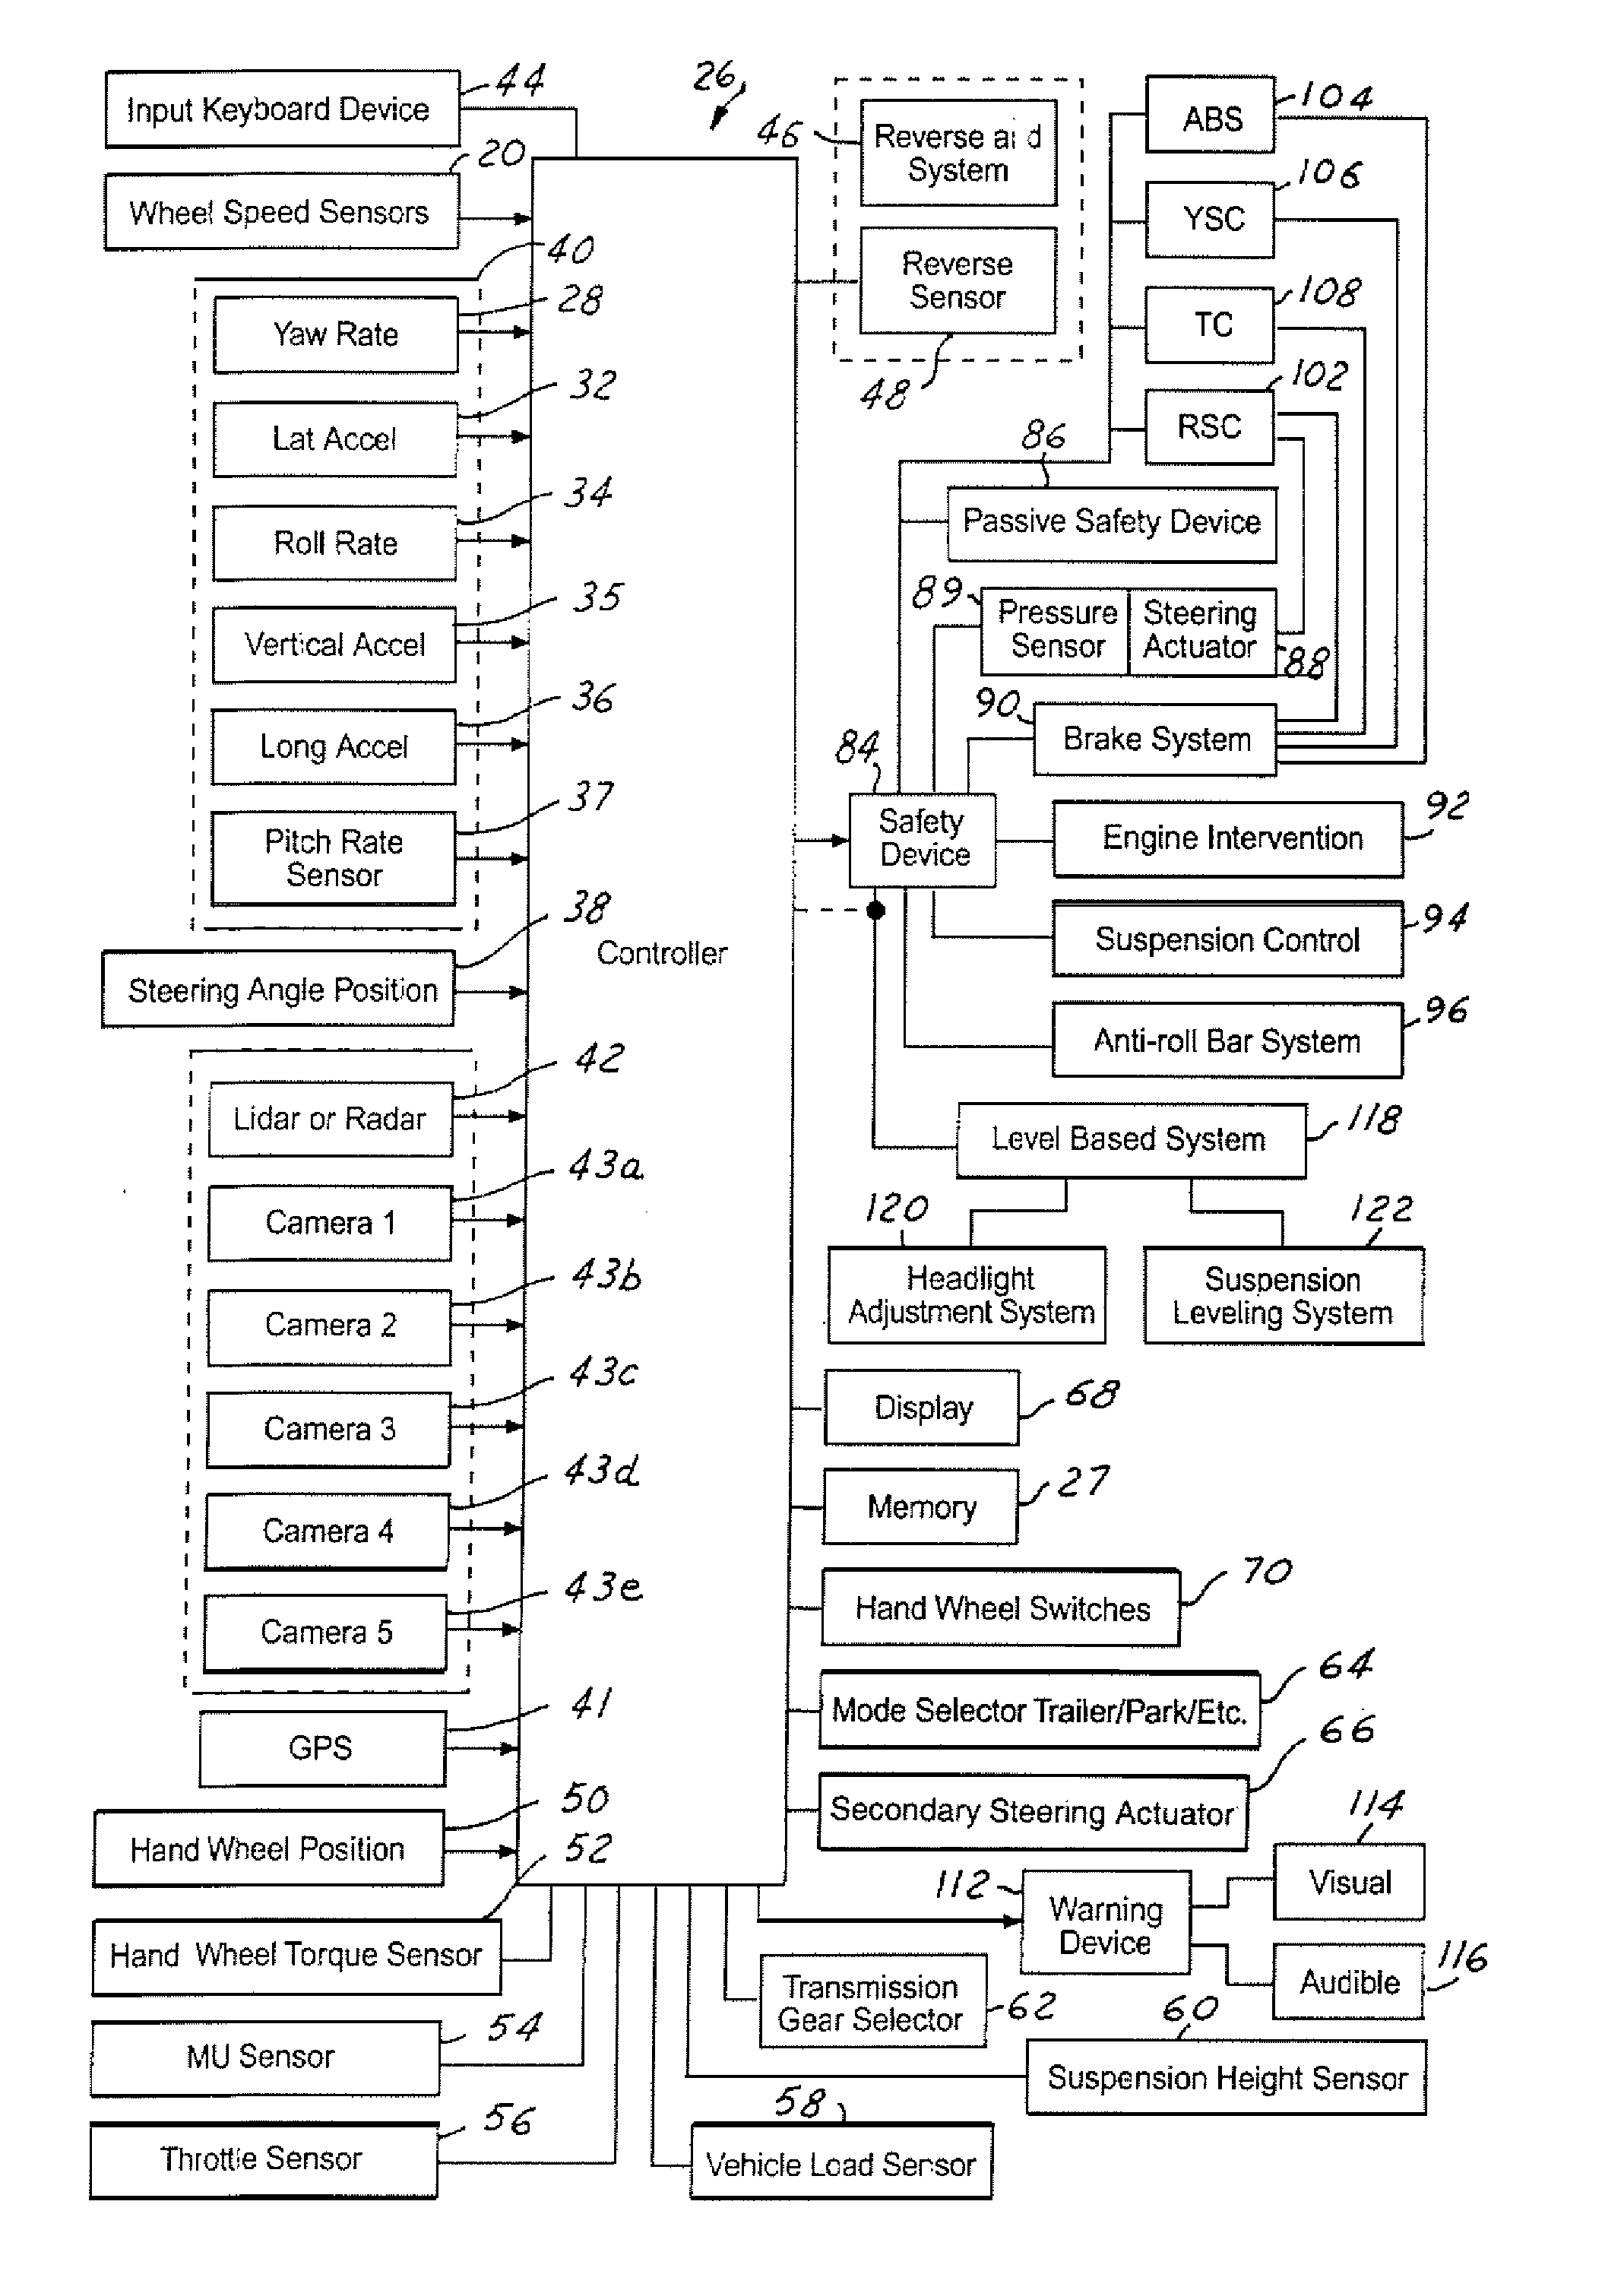 Method and apparatus for controlling a vehicle using an object detection system and brake-steer